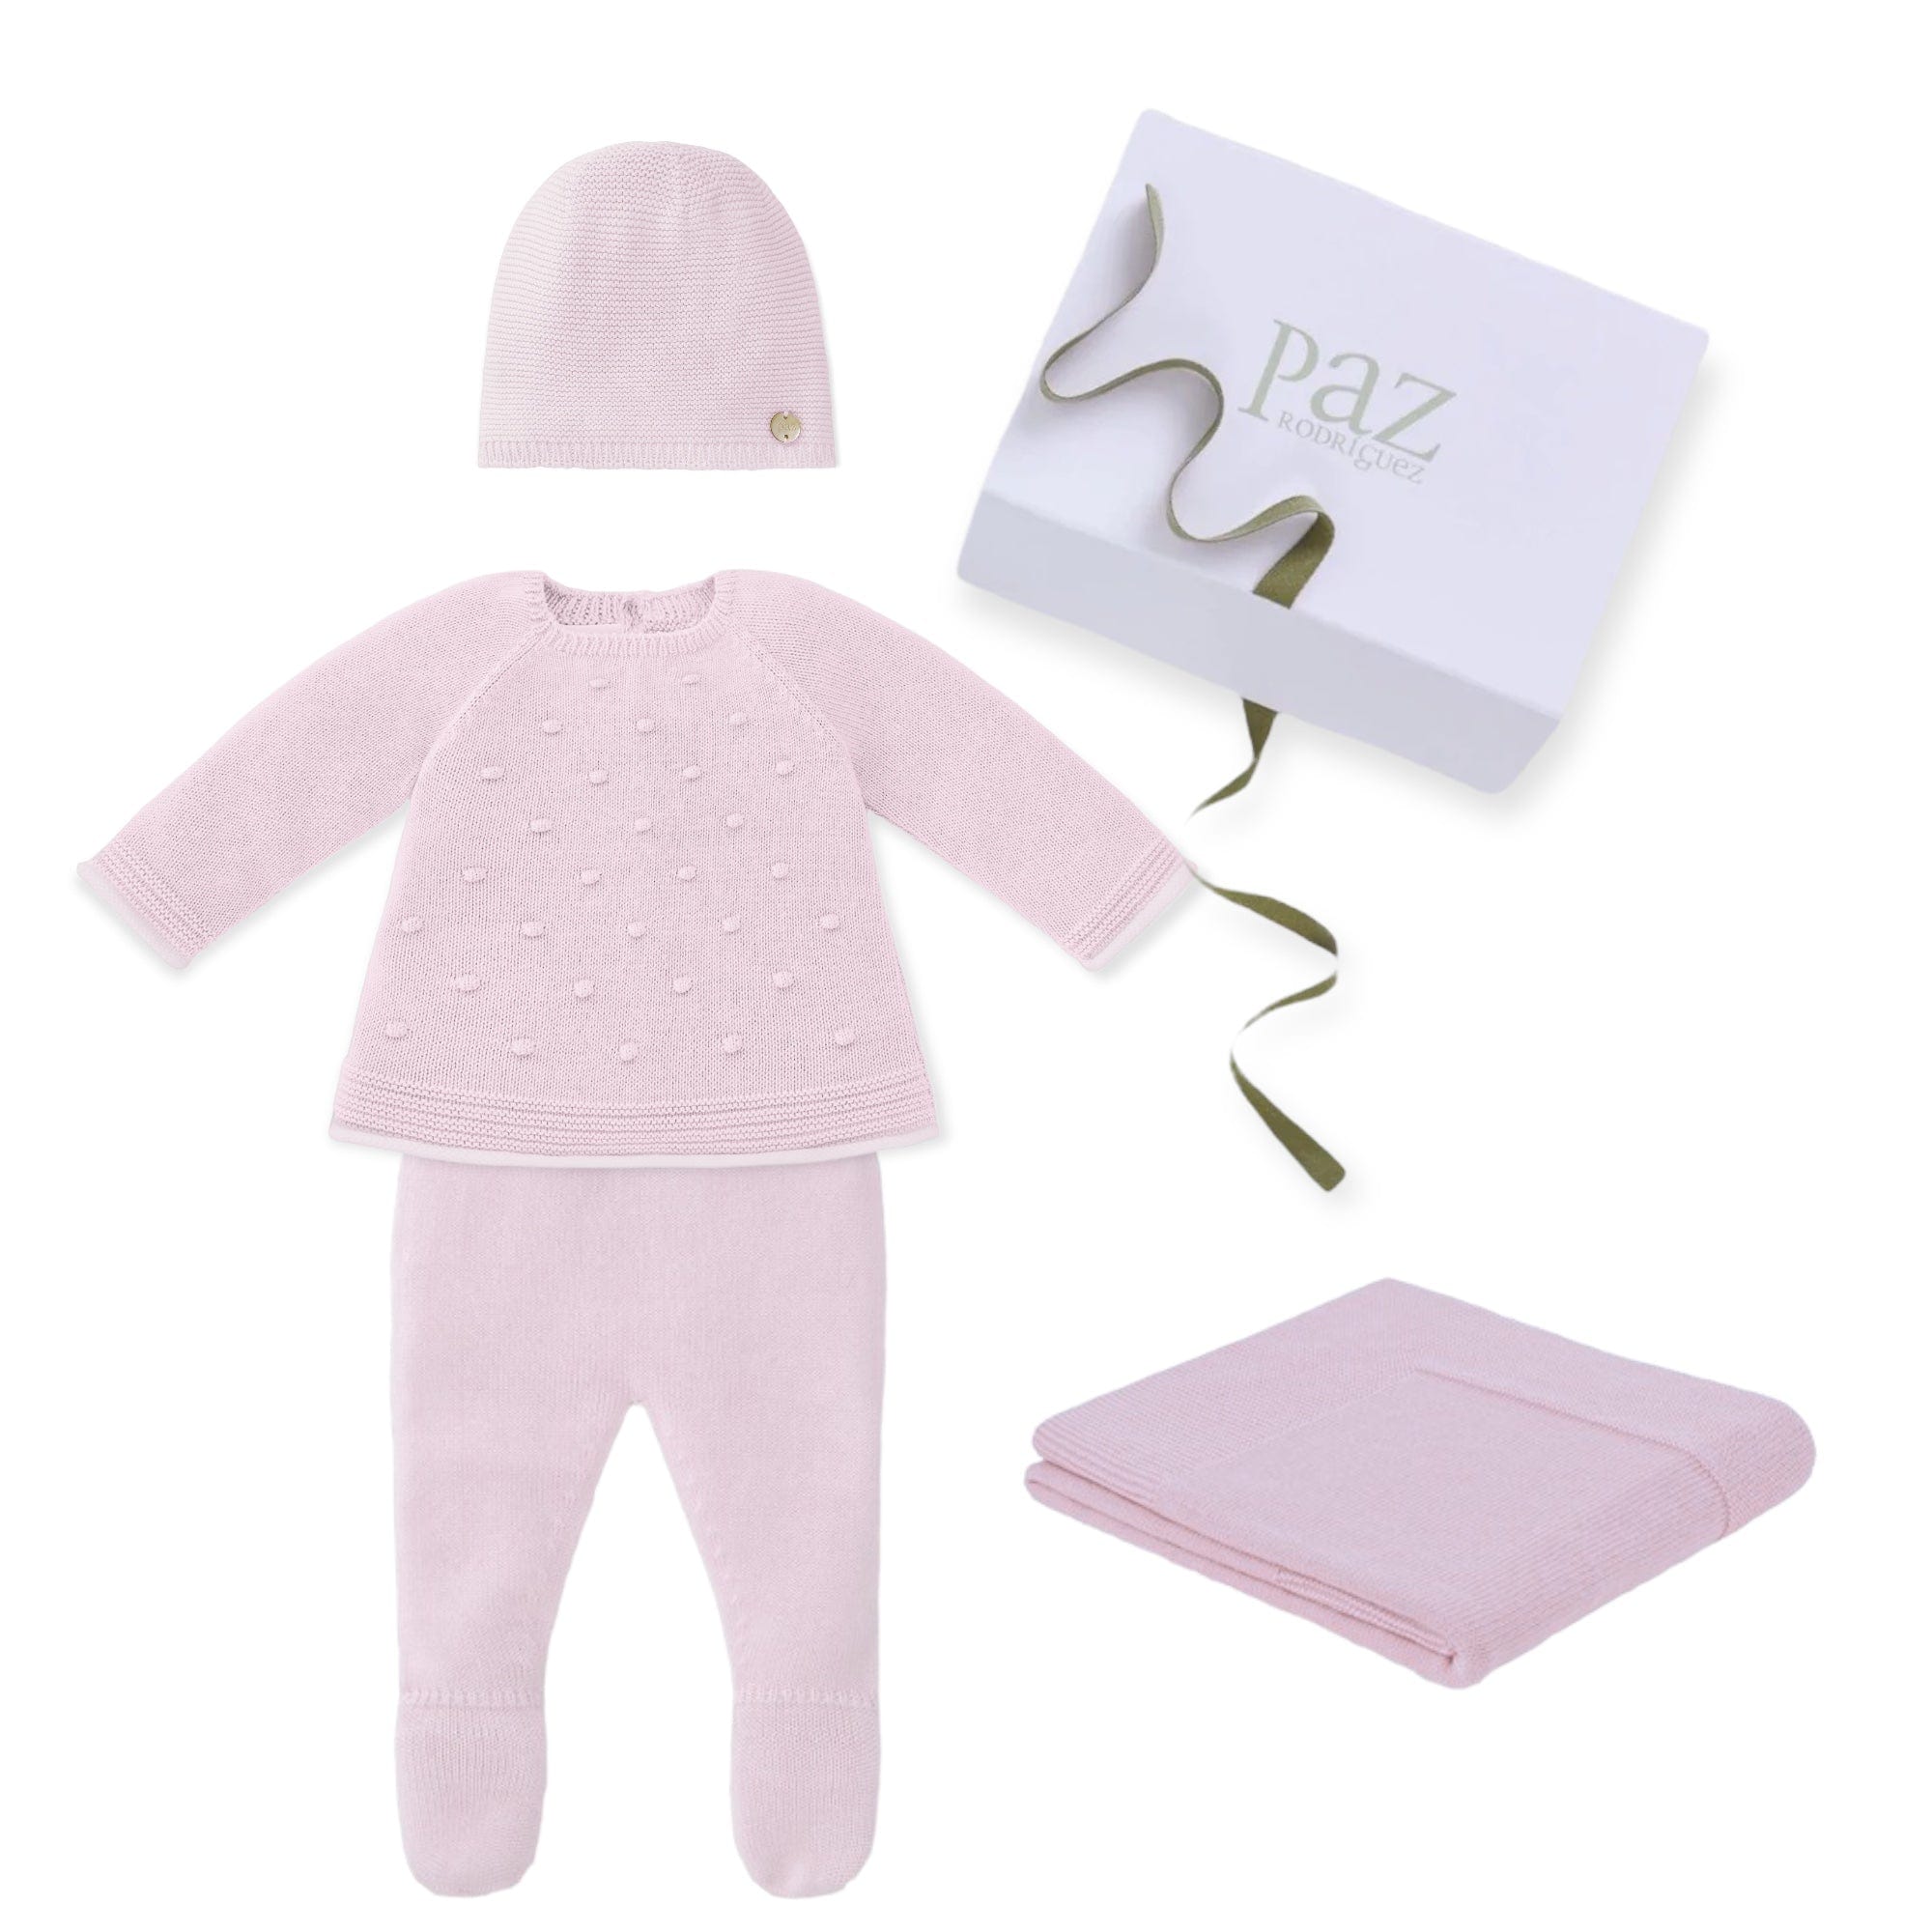 Paz Rodriguez Pink Knitted 4 piece Boxed Gift Set